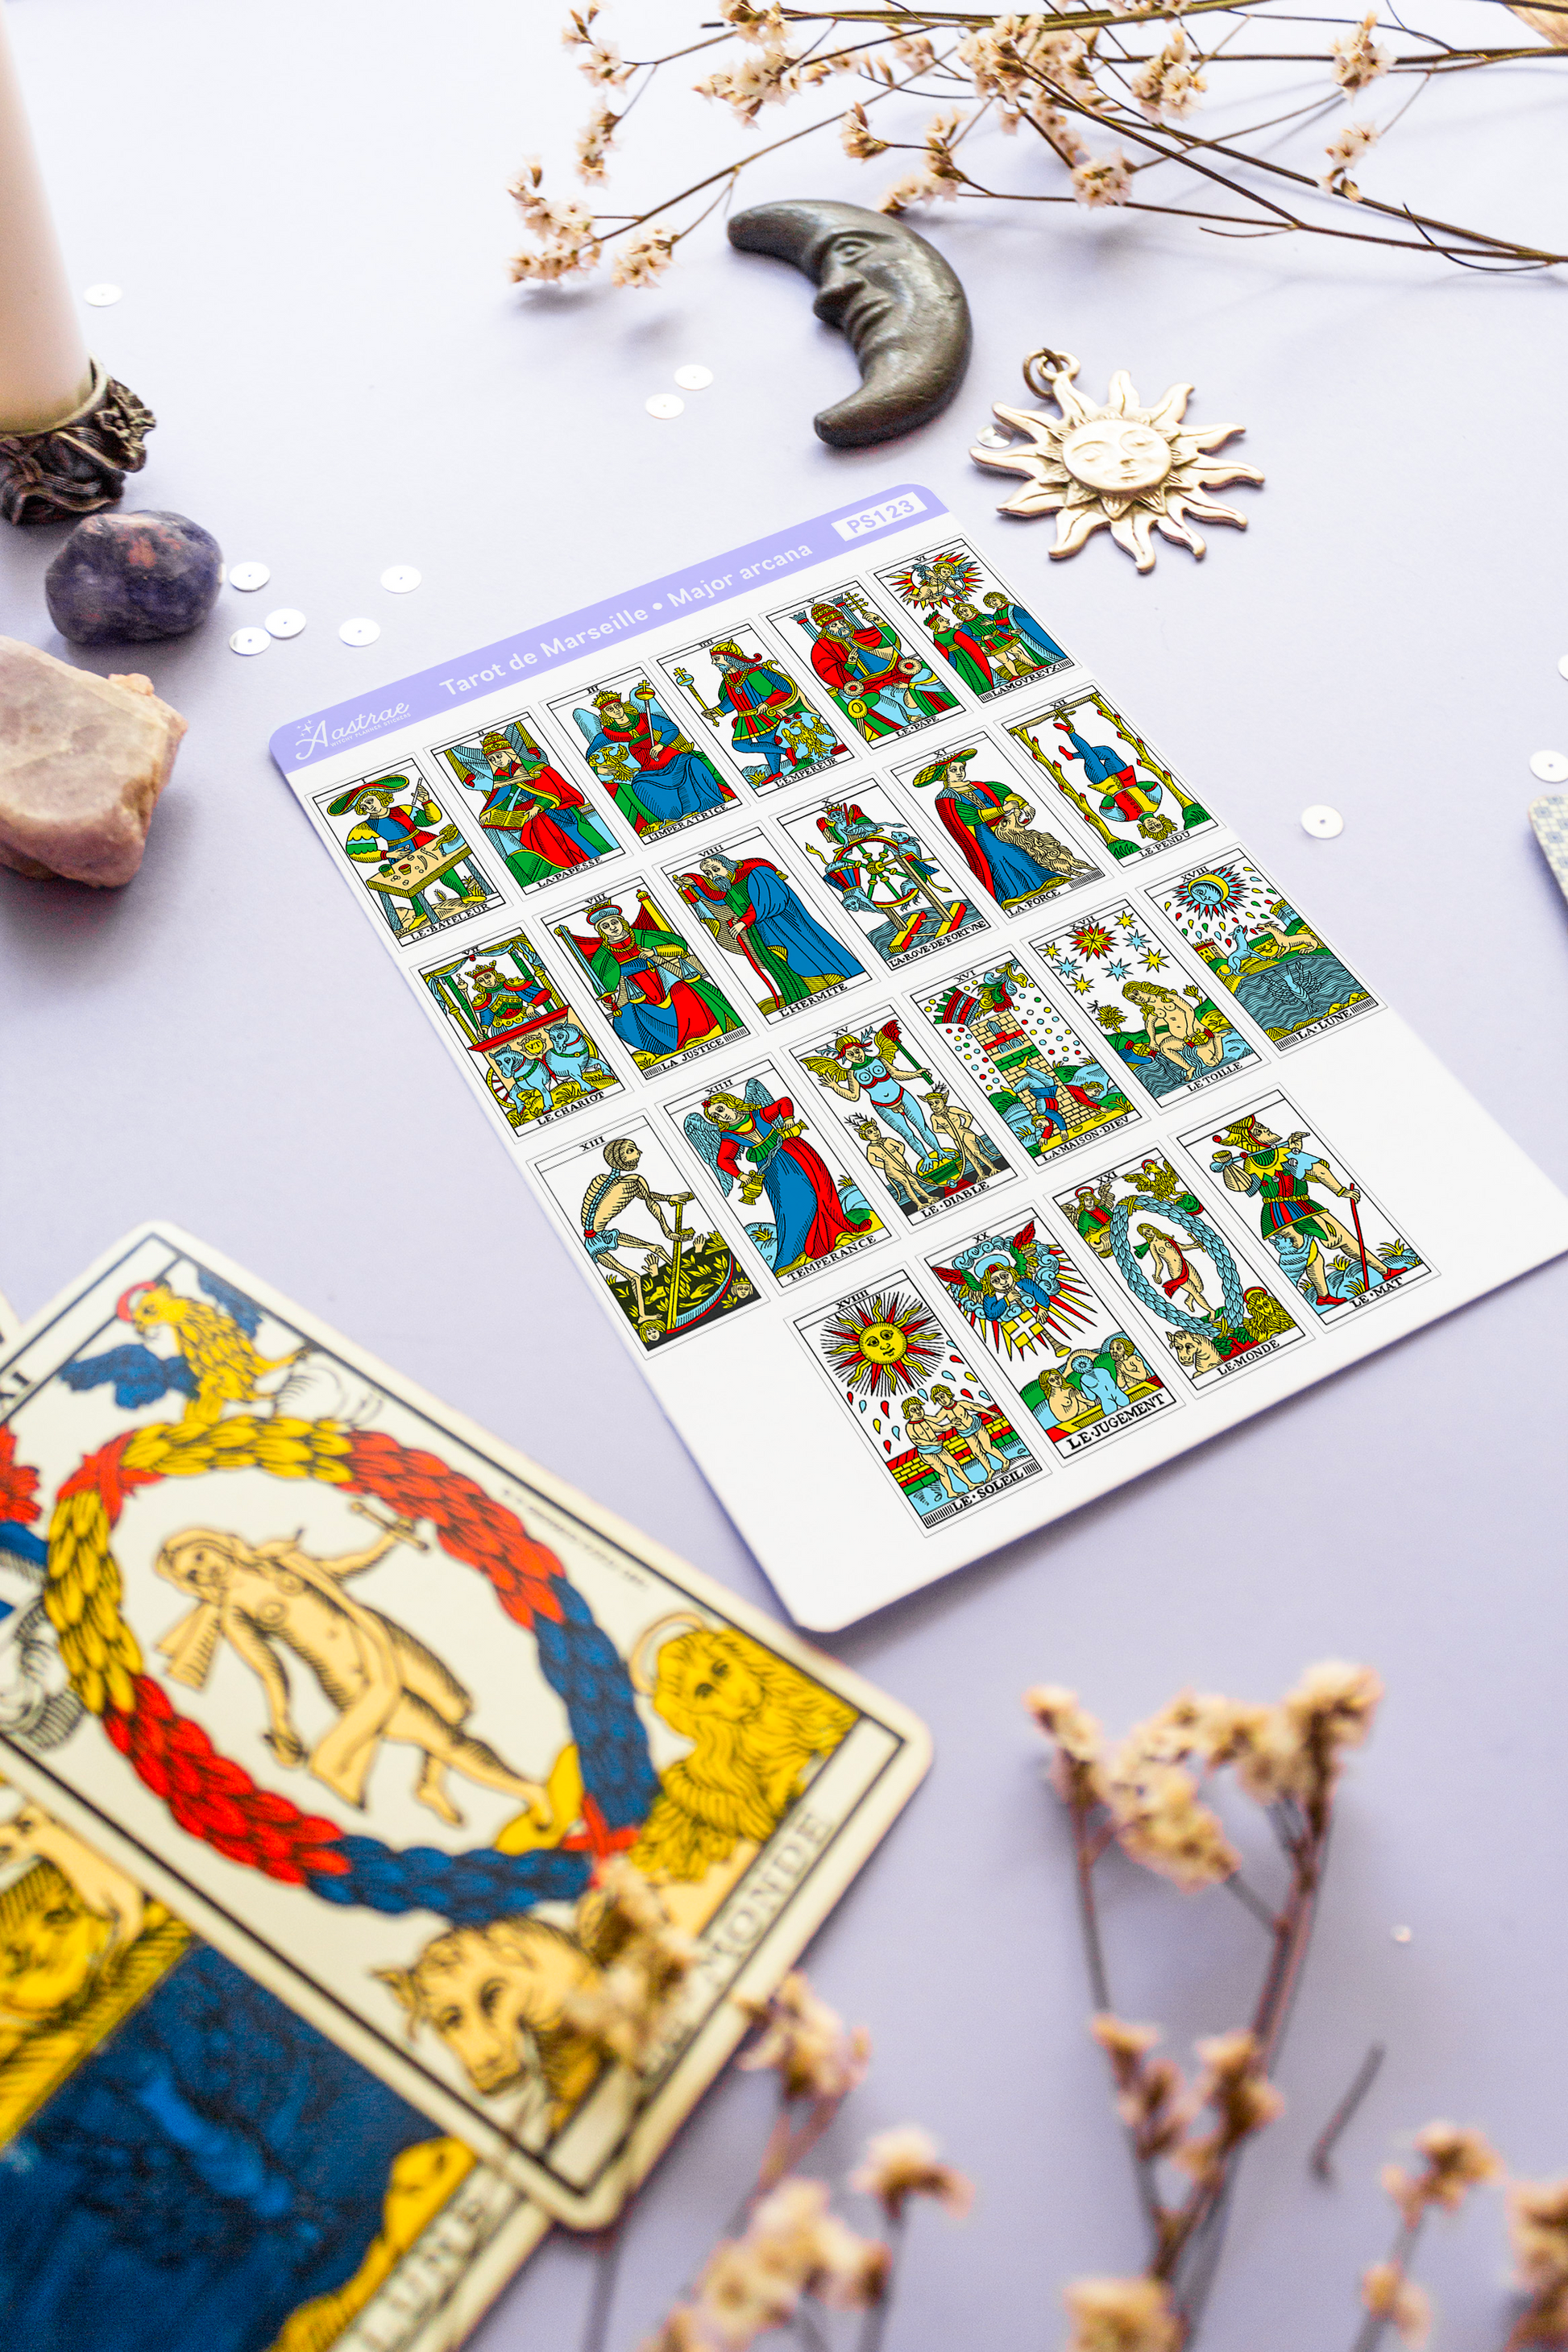 Tarot de Marseille Stickers for Journaling – aastrae